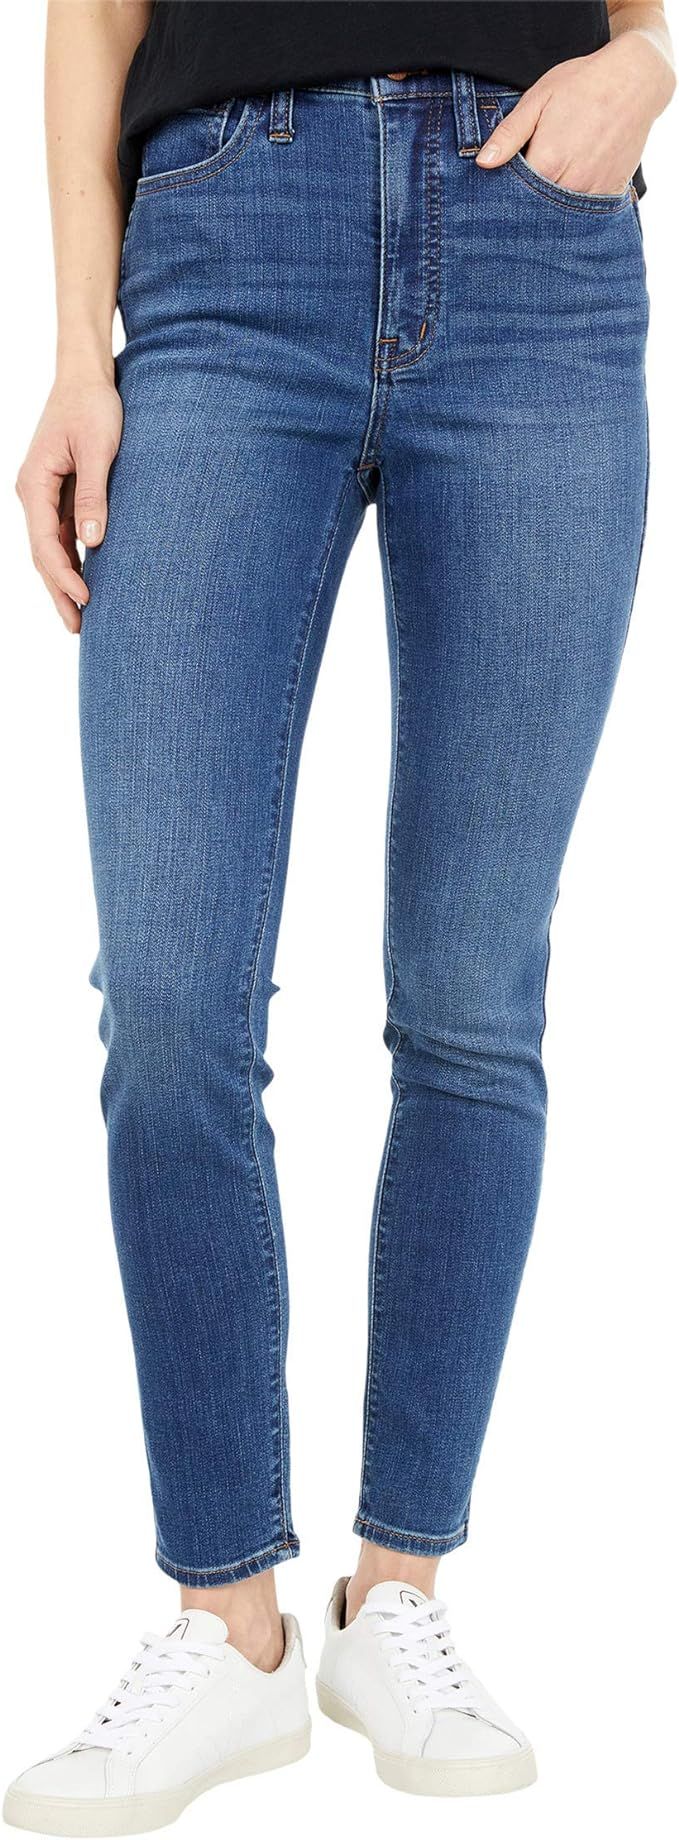 Madewell Roadtripper Jeans in Playford Wash | Amazon (US)